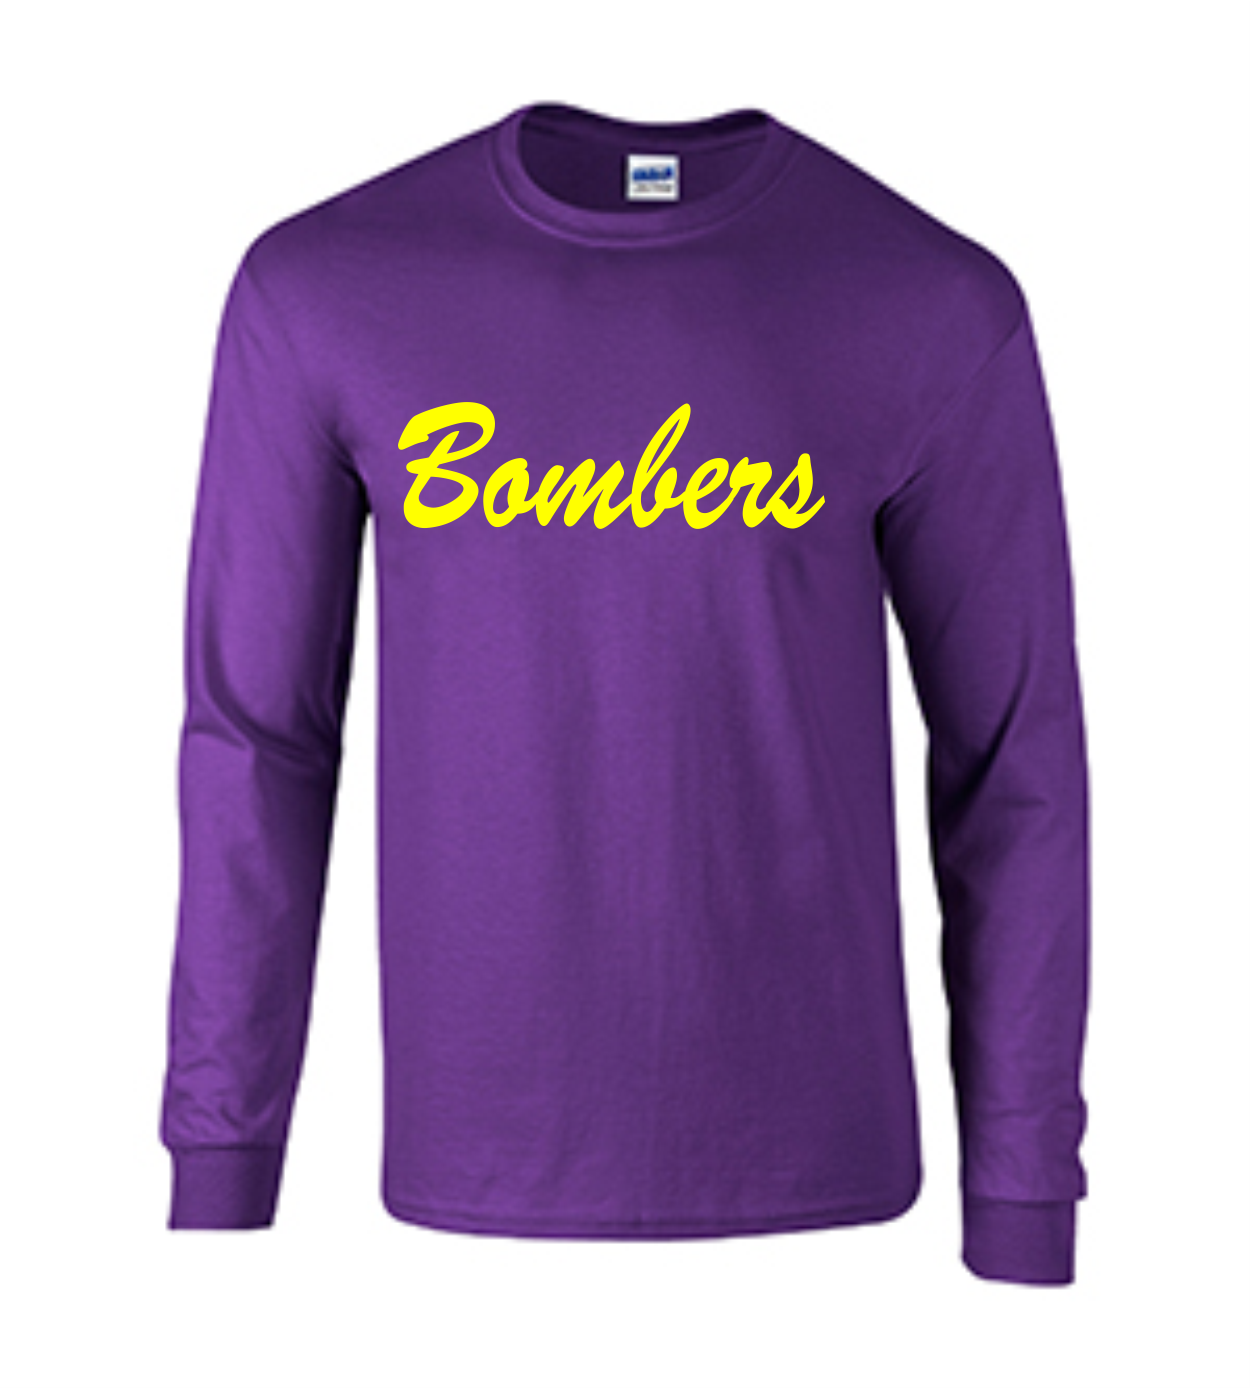 Long Sleeve Cotton T-Shirt - Adult & Youth - Add Player Name & Number on Back (Optional)